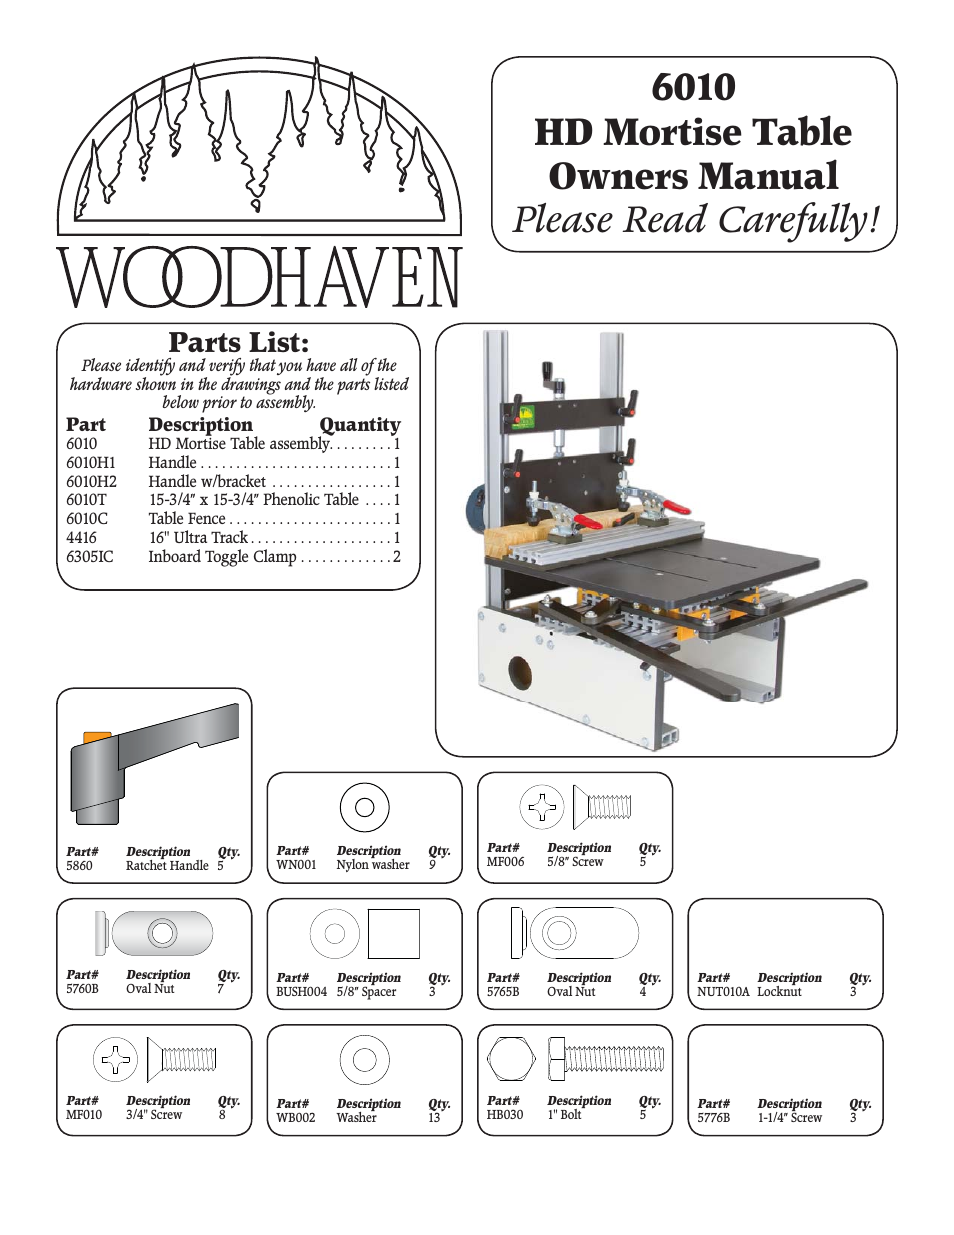 6010: HD Mortise Table